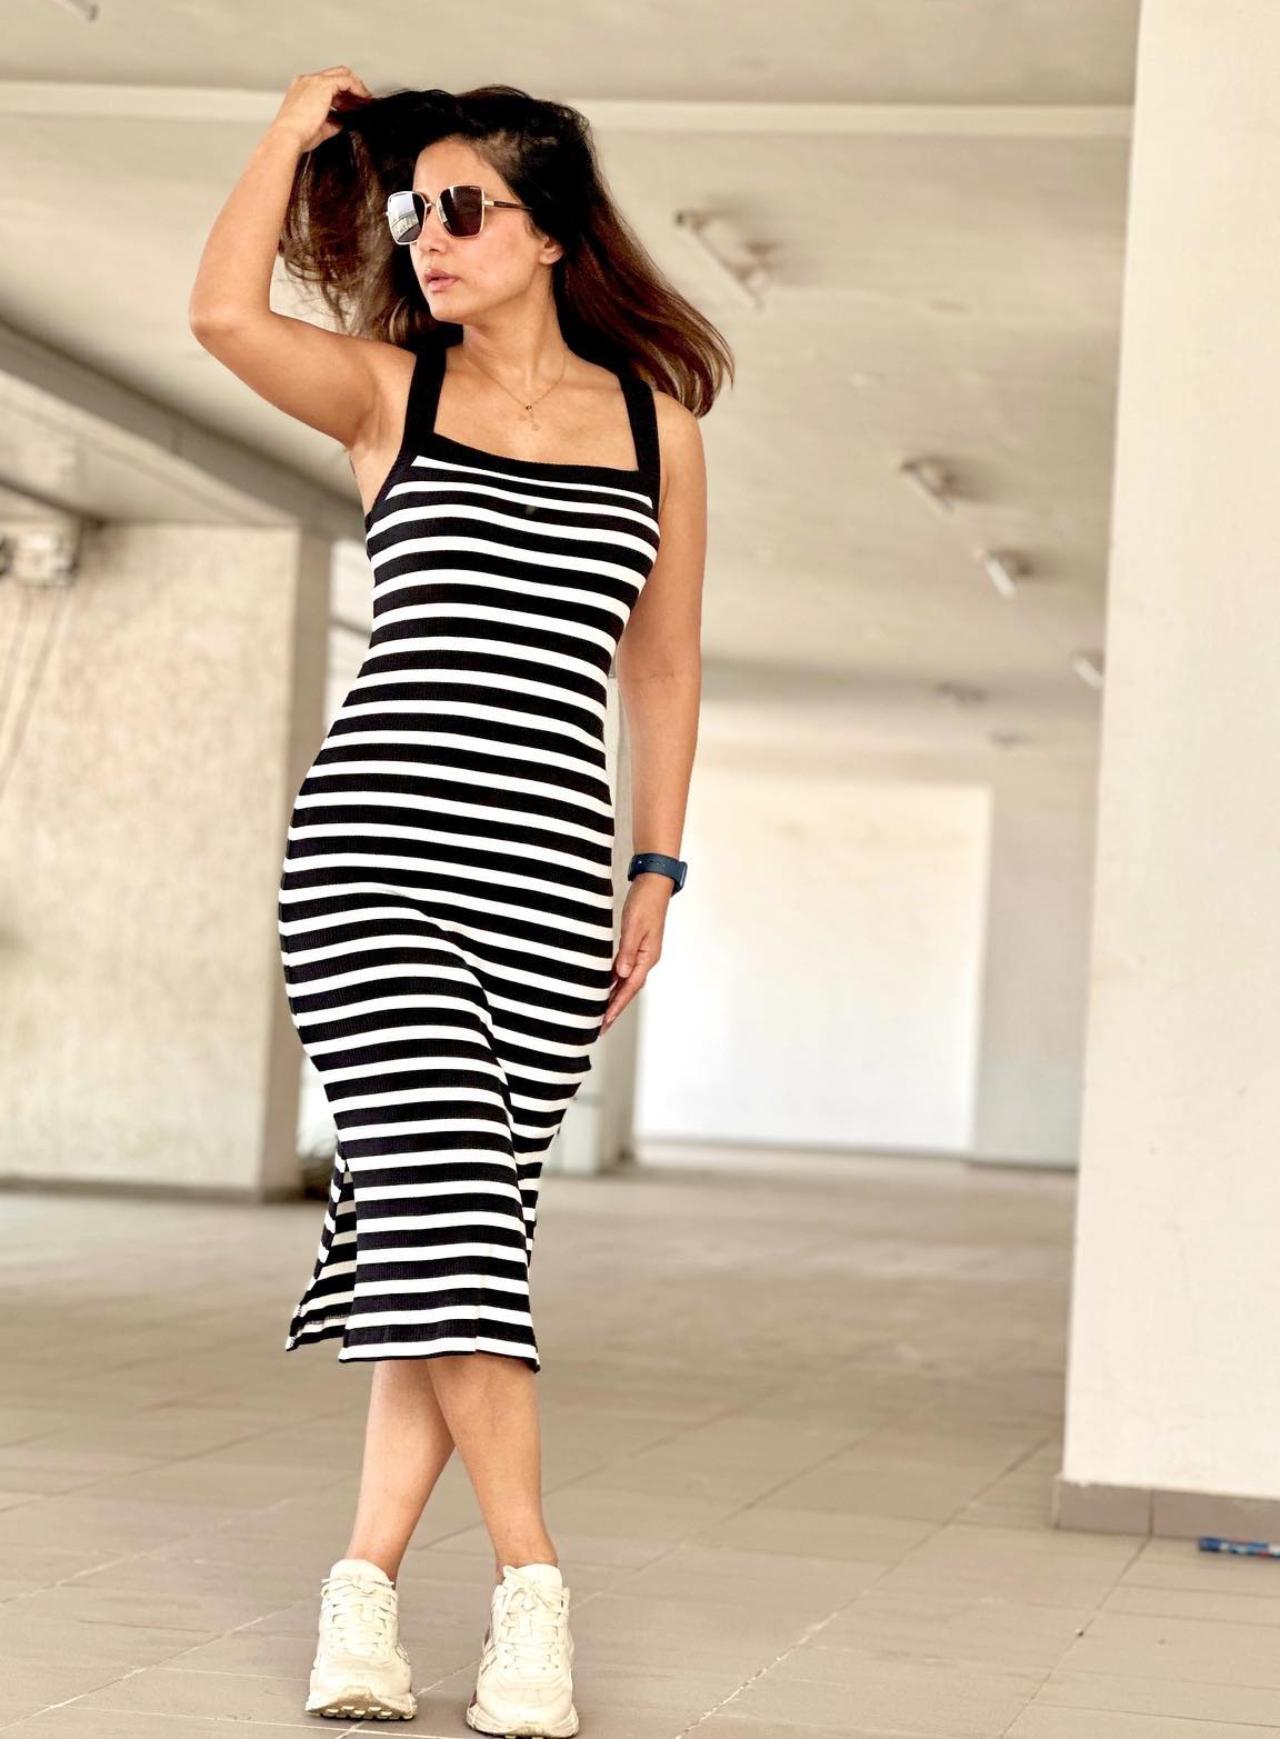 Hina Khan added some patterns to her fitted black and white outfit with matching white shoes